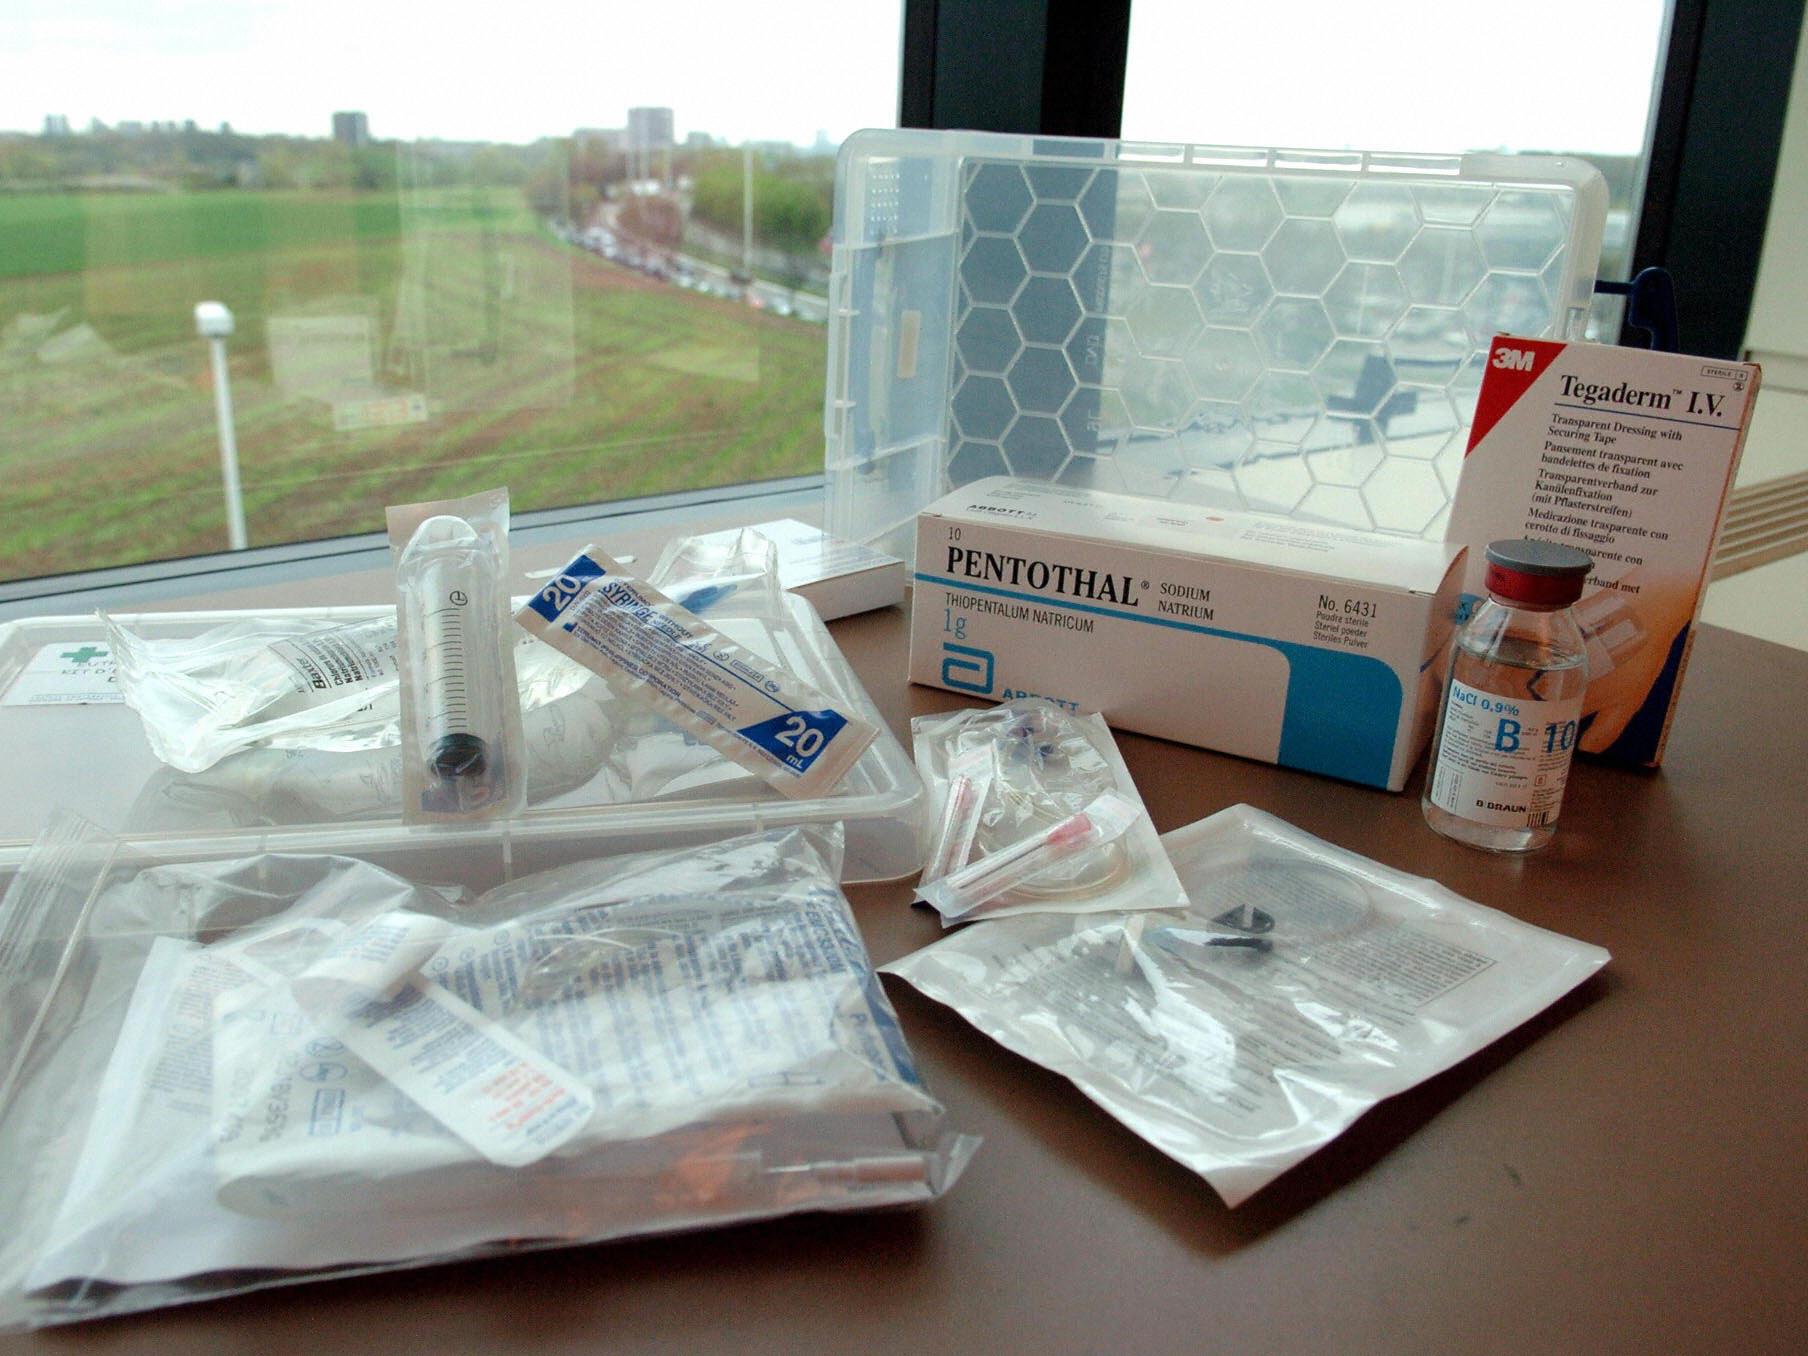 An 'euthanasia kit' available in Belgian pharmacies for doctors to practise euthanasia at patients' homes